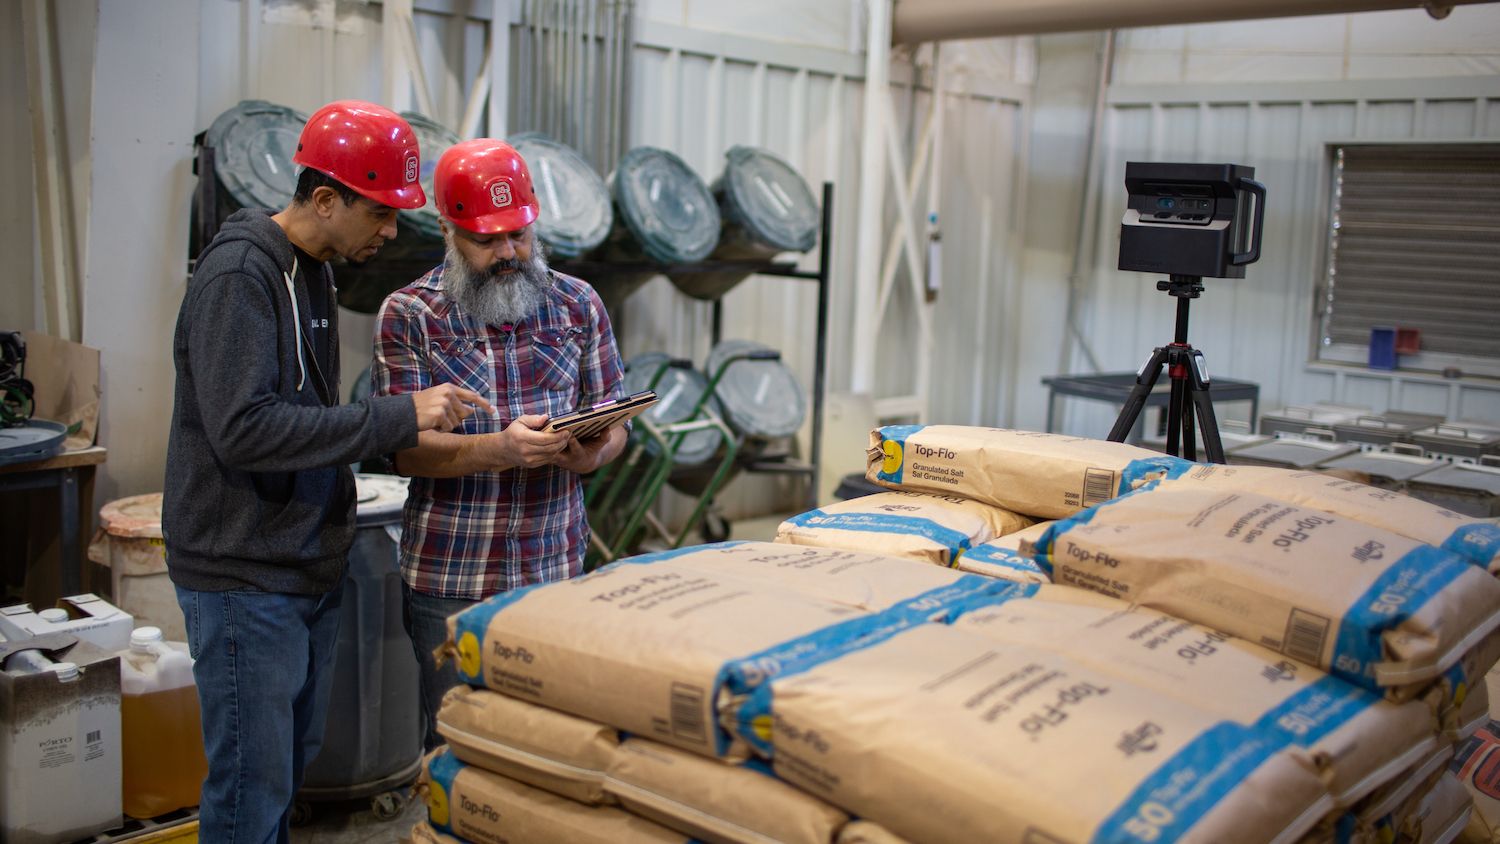 Two workers in red hard hats stand near stacked bags of animal feed